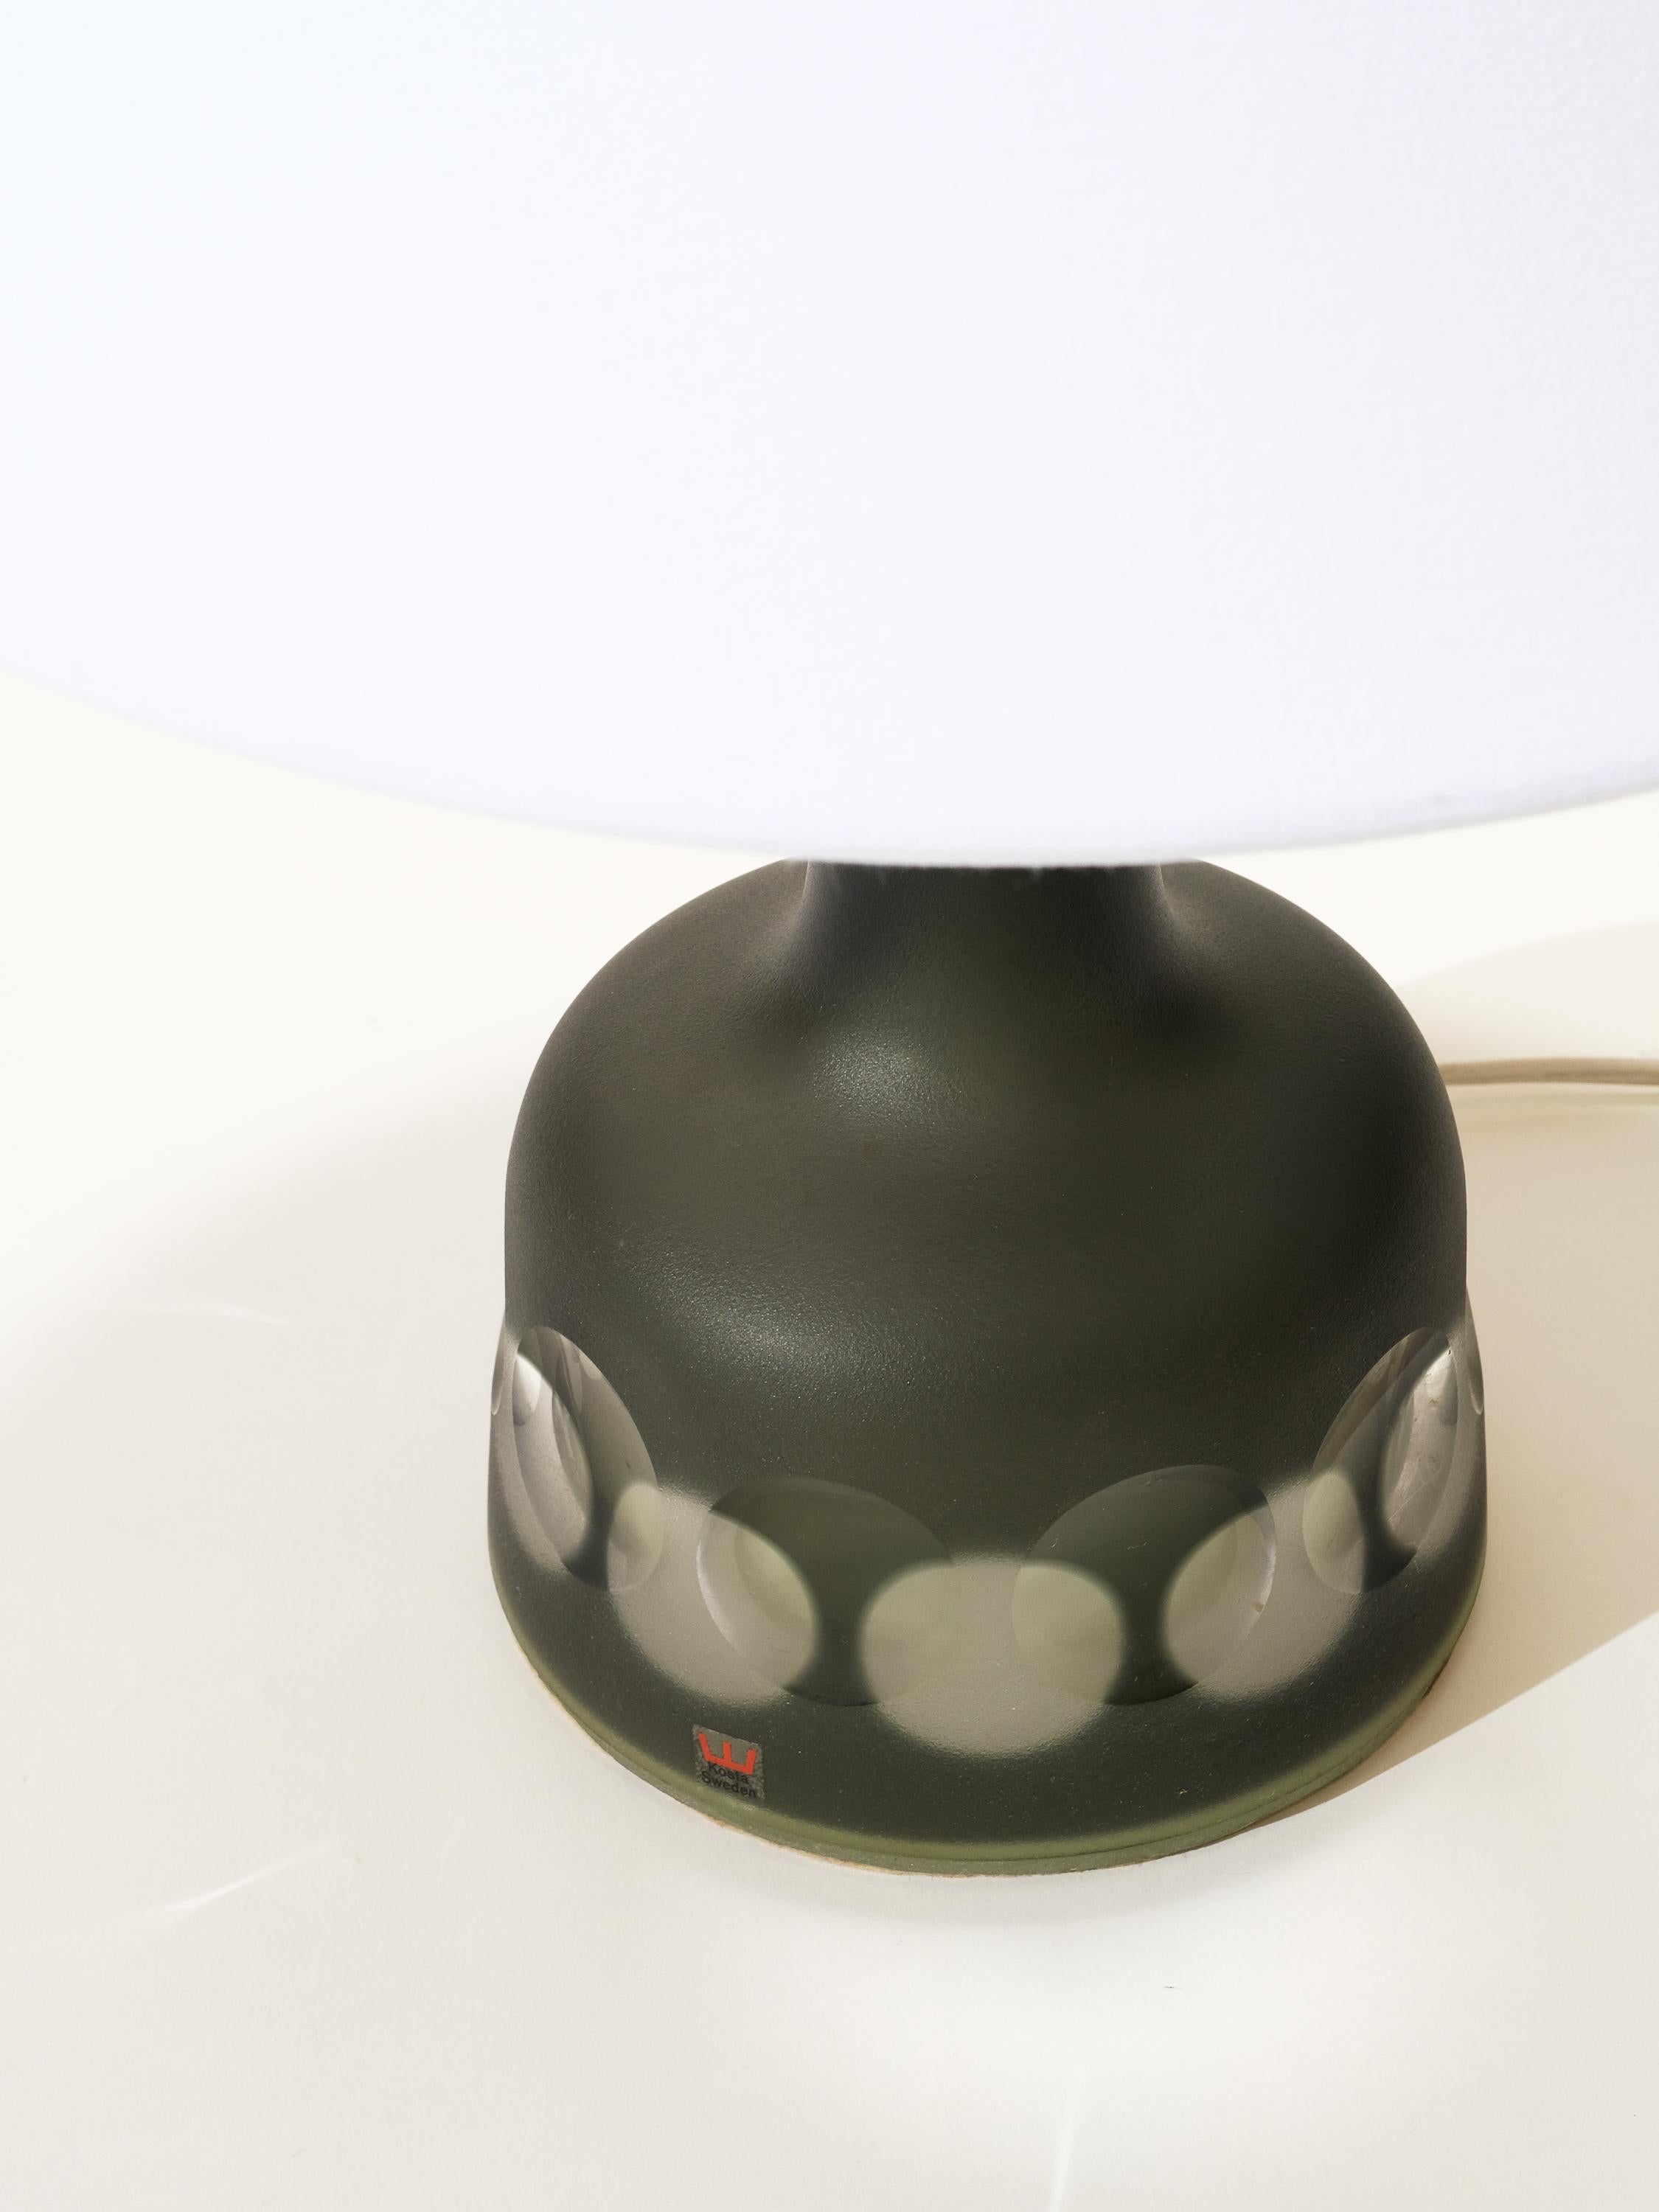 Glass Table Lamp by Ove Sandeberg for Kosta Boda, 1960s In Good Condition For Sale In Karis, Nyland